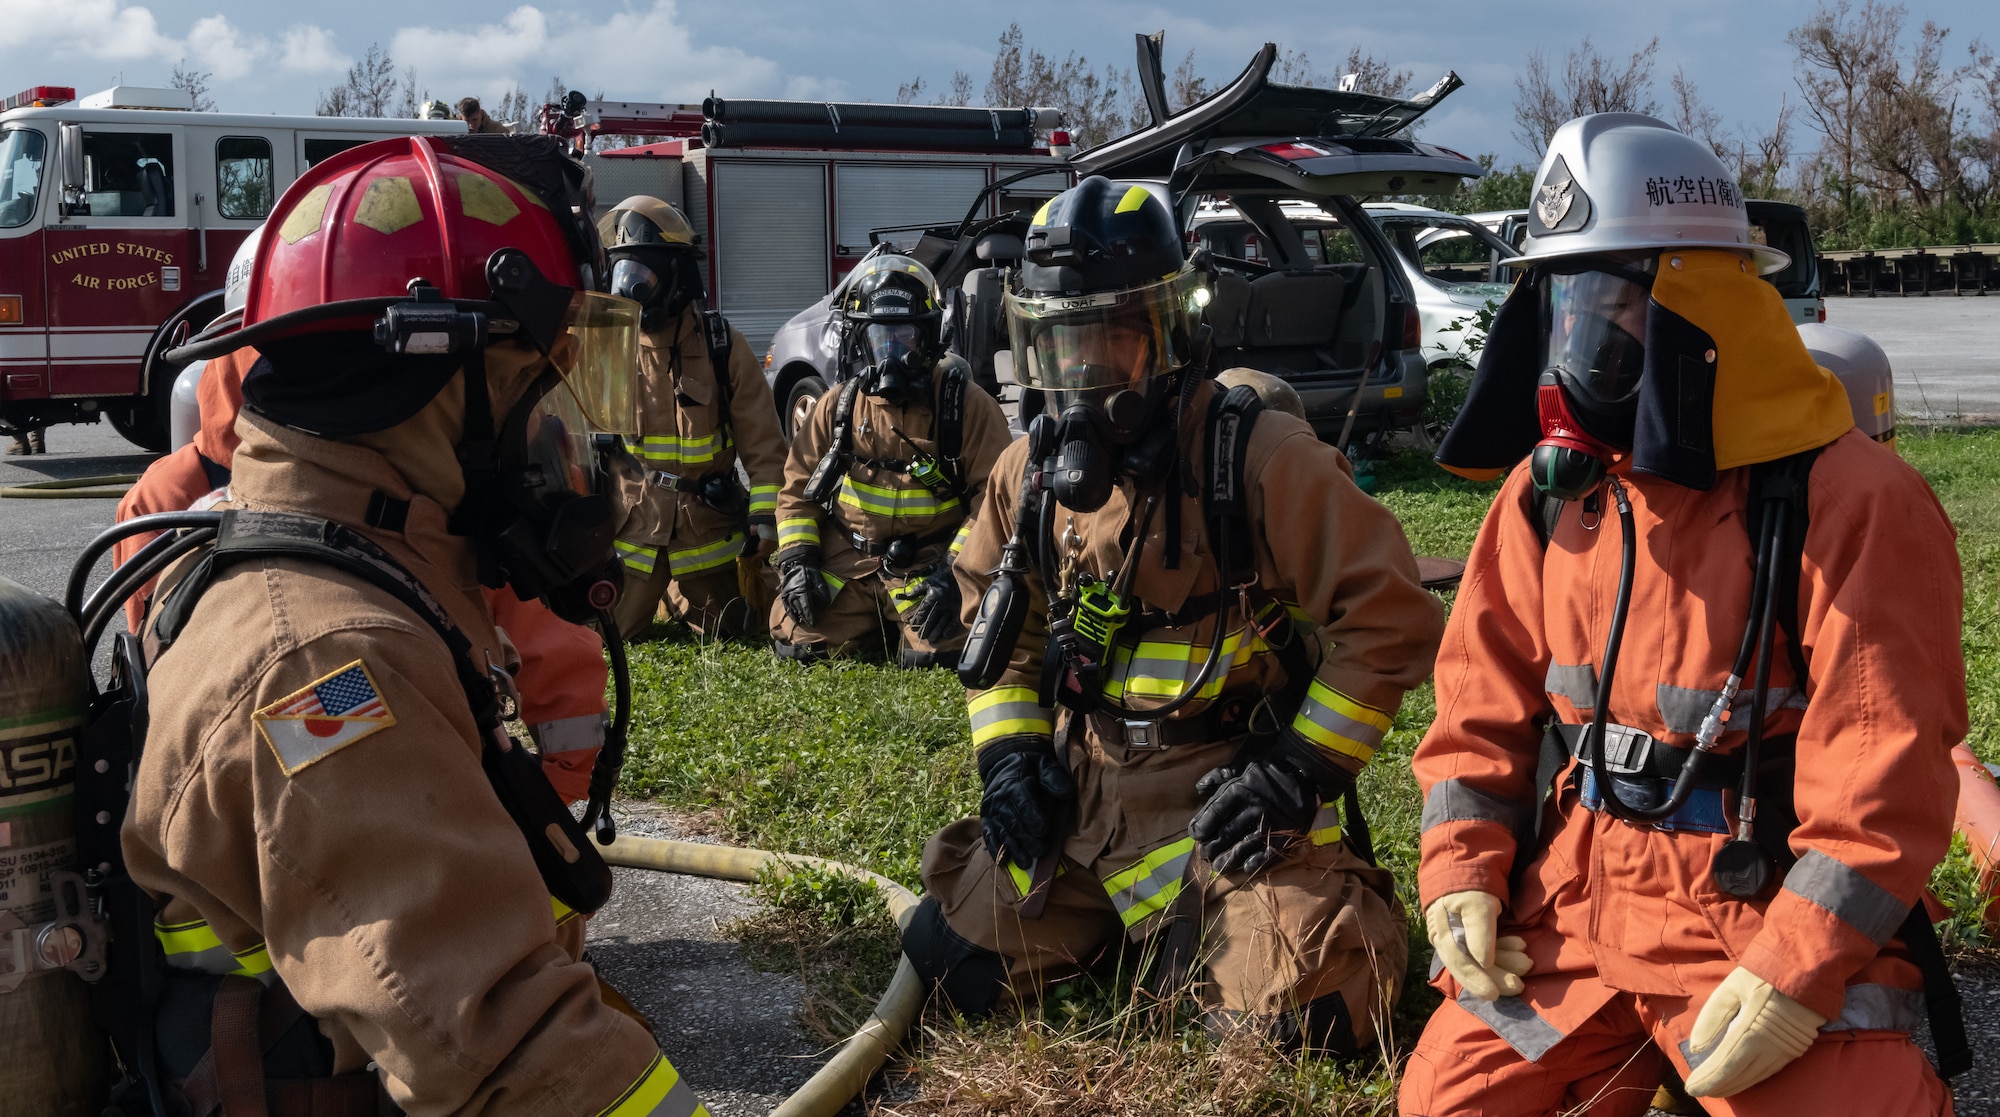 U.S. Air Force firefighters from the 18th Civil Engineer Squadron and Japan Air Self Defense Force firefighters from the 9th Wing, Naha Air Base, Japan, prepare to start structural live fire training Nov. 15, 2018, at Kadena Air Base, Japan. The training enabled both units to hone their techniques, meet annual requirements, develop communication skills and foster team building. (U.S. Air Force photo by Staff Sgt. Micaiah Anthony)